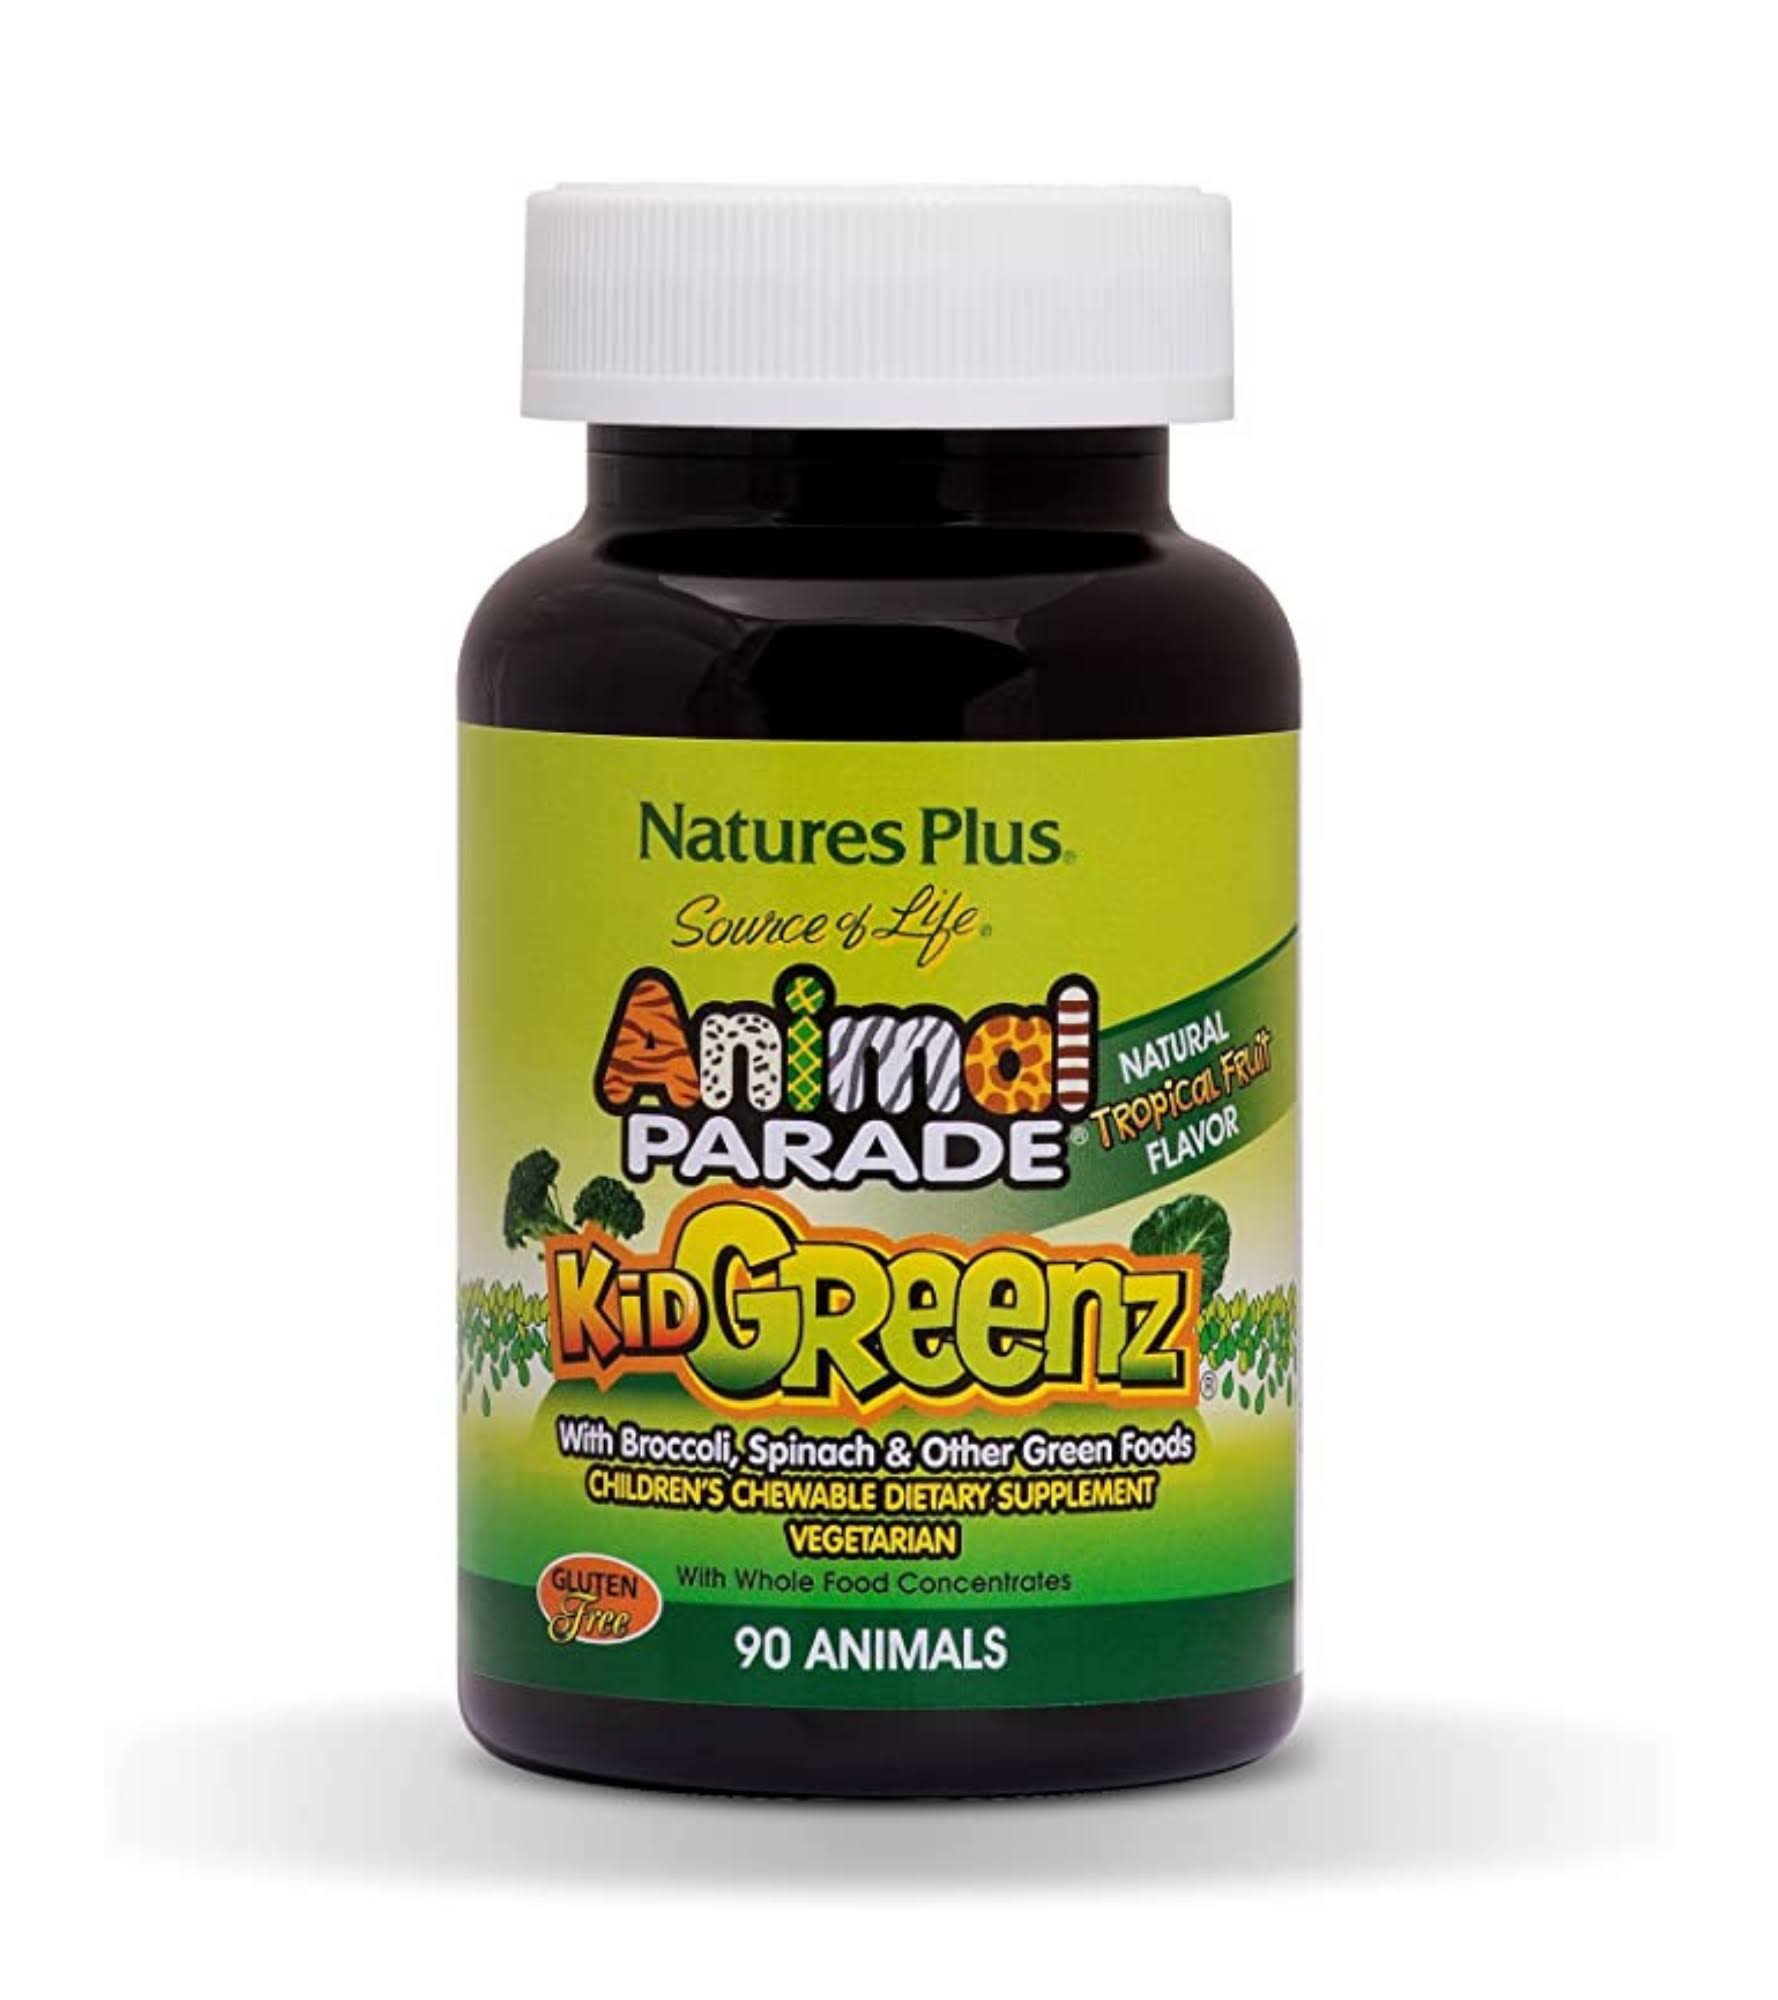 Nature's Plus Animal Parade Kid Greenz Chewable Dietary Supplement - Tropical Fruit, x90